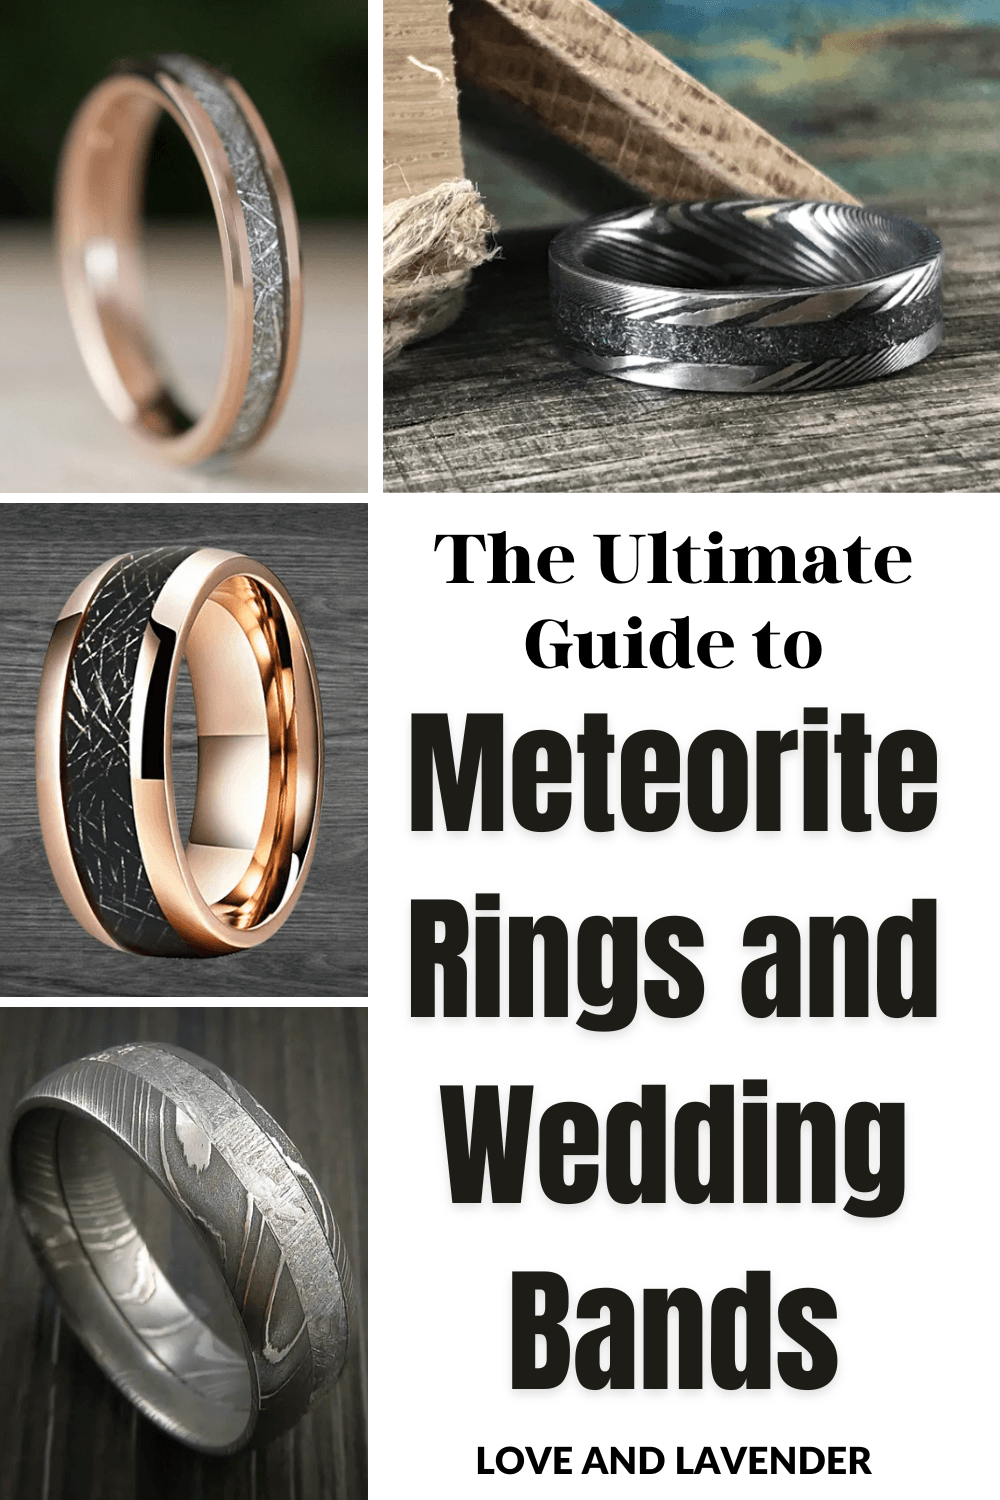 11 Meteorite Wedding Bands that are (Cue Pun) Out of this World